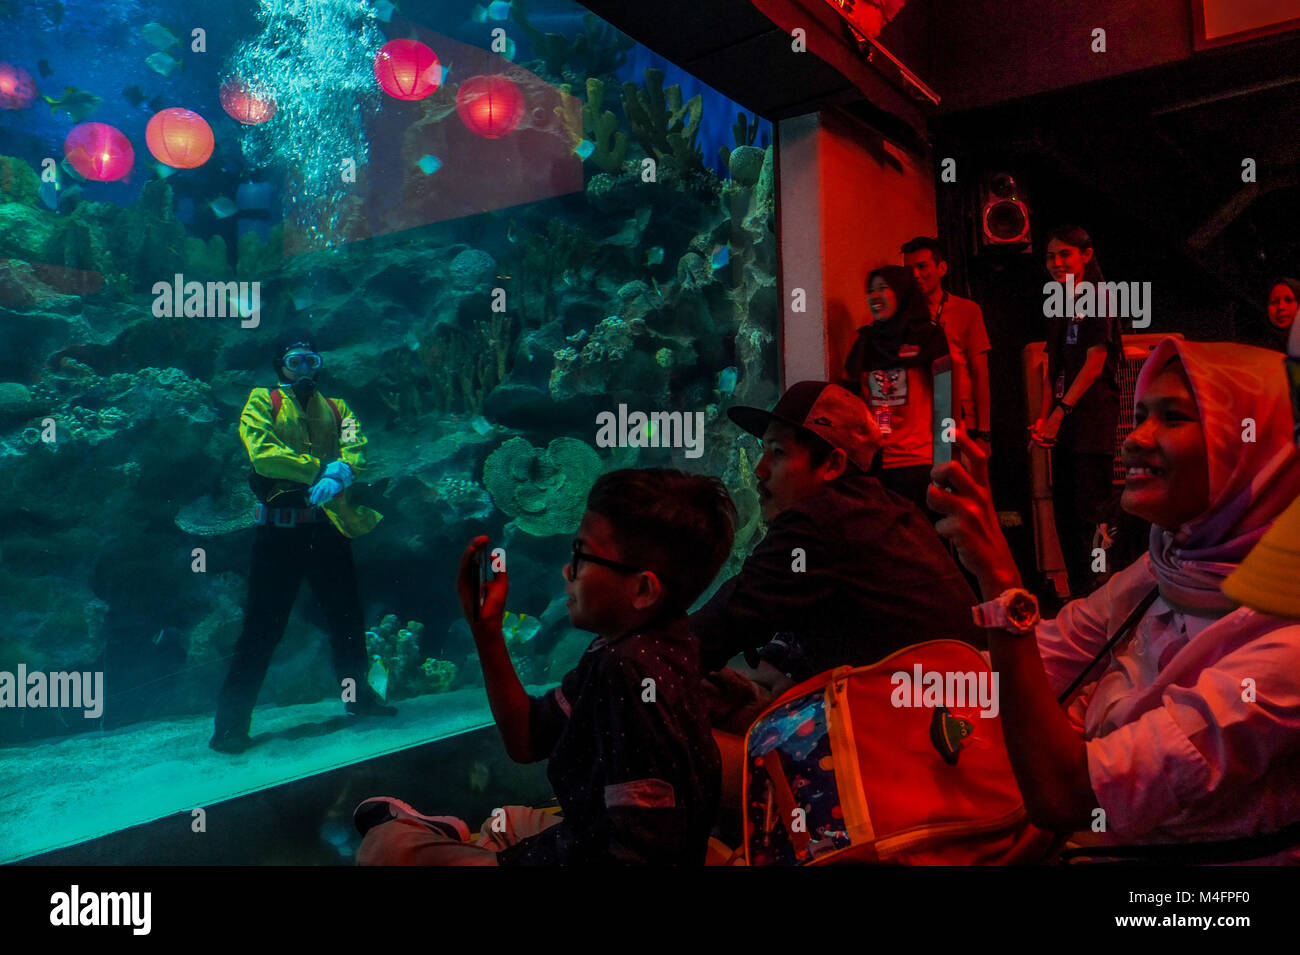 Kuala Lumpur, Malaysia. 16th Feb, 2018. People watch a Kung Fu performances by professional diver inside the Aquaria KLCC during Chinese New Year celebration in Kuala Lumpur on February 16, 2018. The Chinese Lunar New Year on February 16 will welcome the Year of the dog (also known as the Year of the Earth Dog). Credit: Samsul Said/AFLO/Alamy Live News Stock Photo